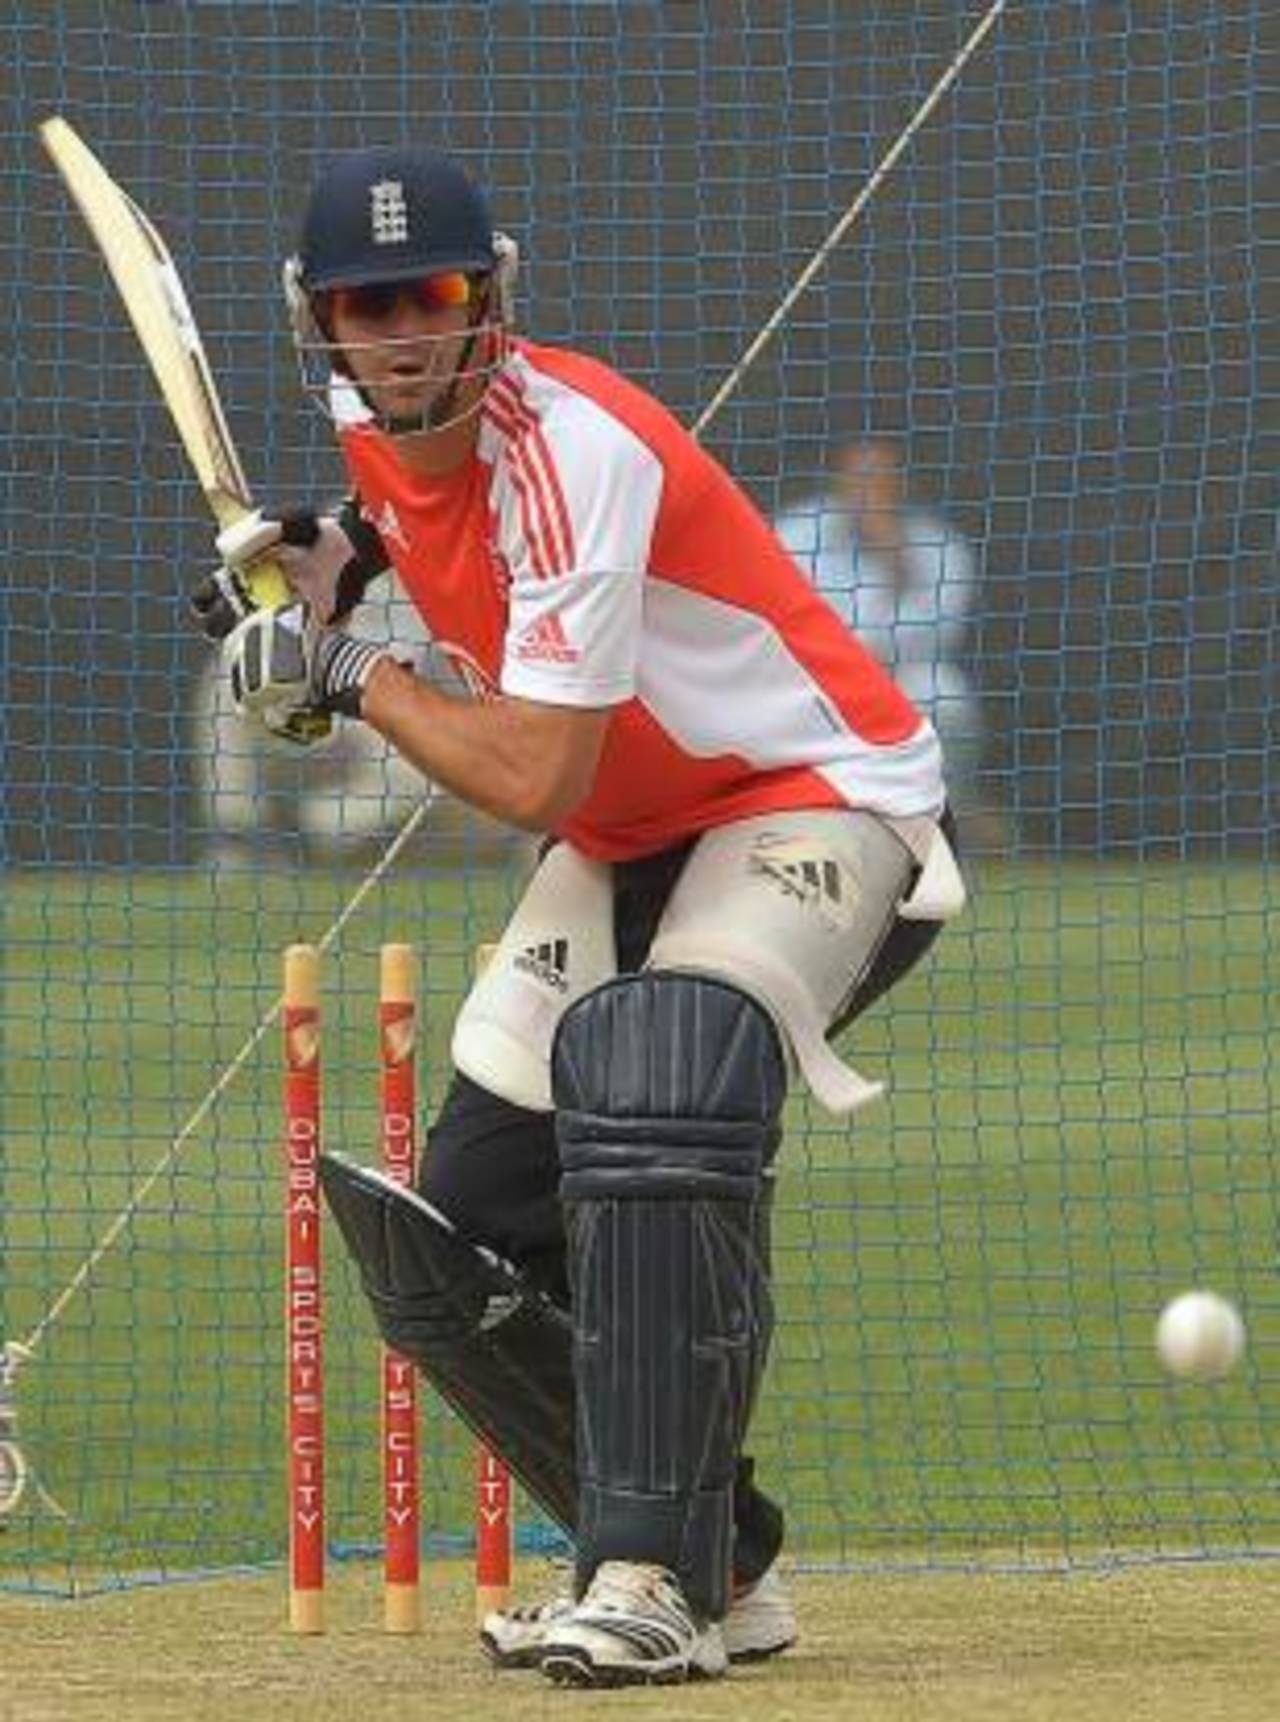 Kevin Pietersen batted with sunglasses on during England nets due to a sandstorm in Dubai&nbsp;&nbsp;&bull;&nbsp;&nbsp;AFP